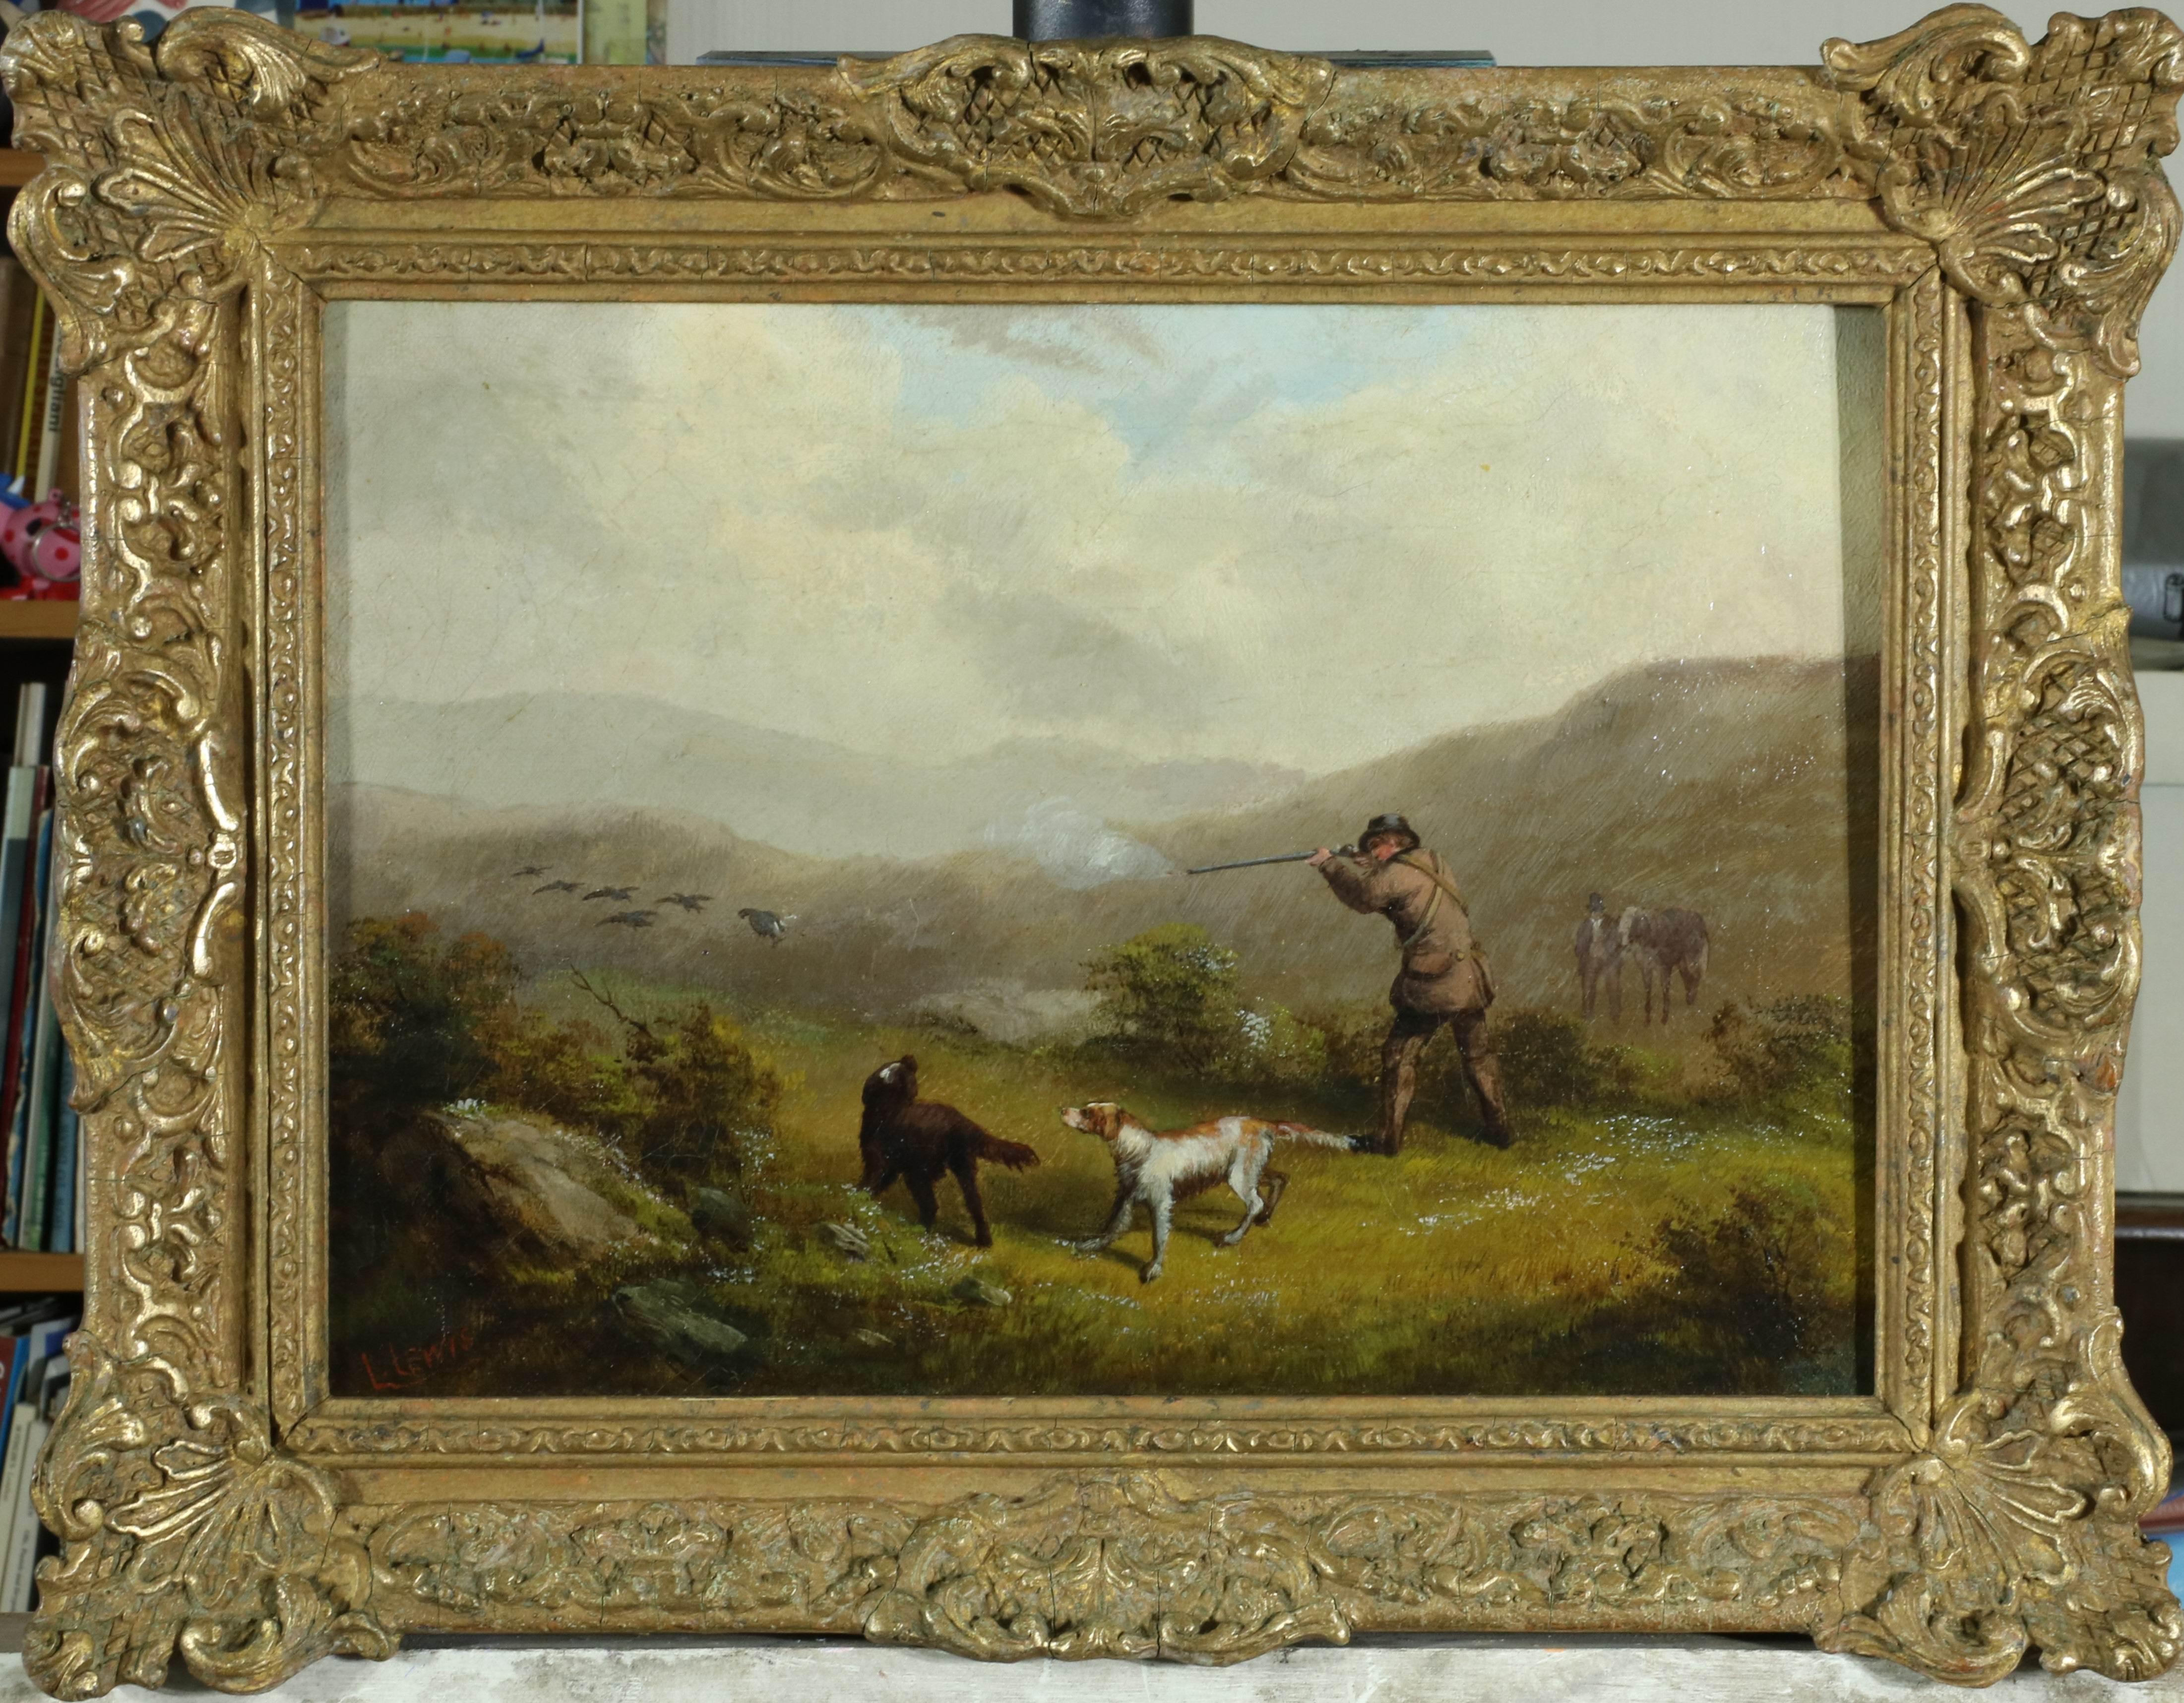 The Grouse Shoot 19th Century Gun with Dogs and grouse in hilly landscape, Oil  - Realist Painting by Lennard Lewis